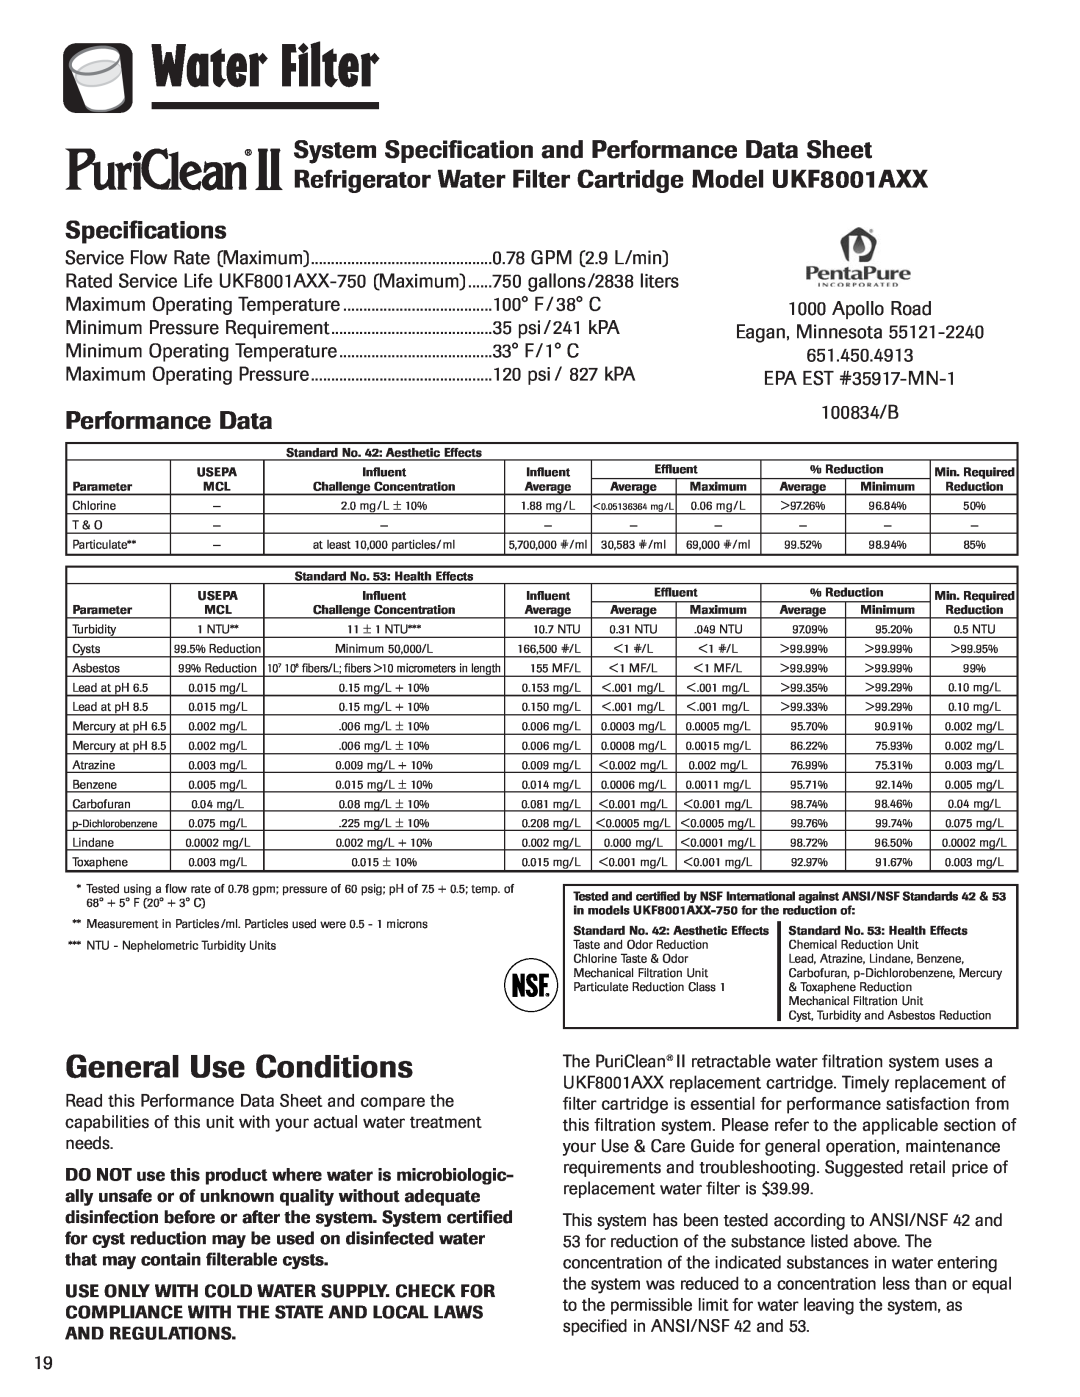 Amana ASD2328HEB General Use Conditions, System Specification and Performance Data Sheet, Specifications, Water Filter 